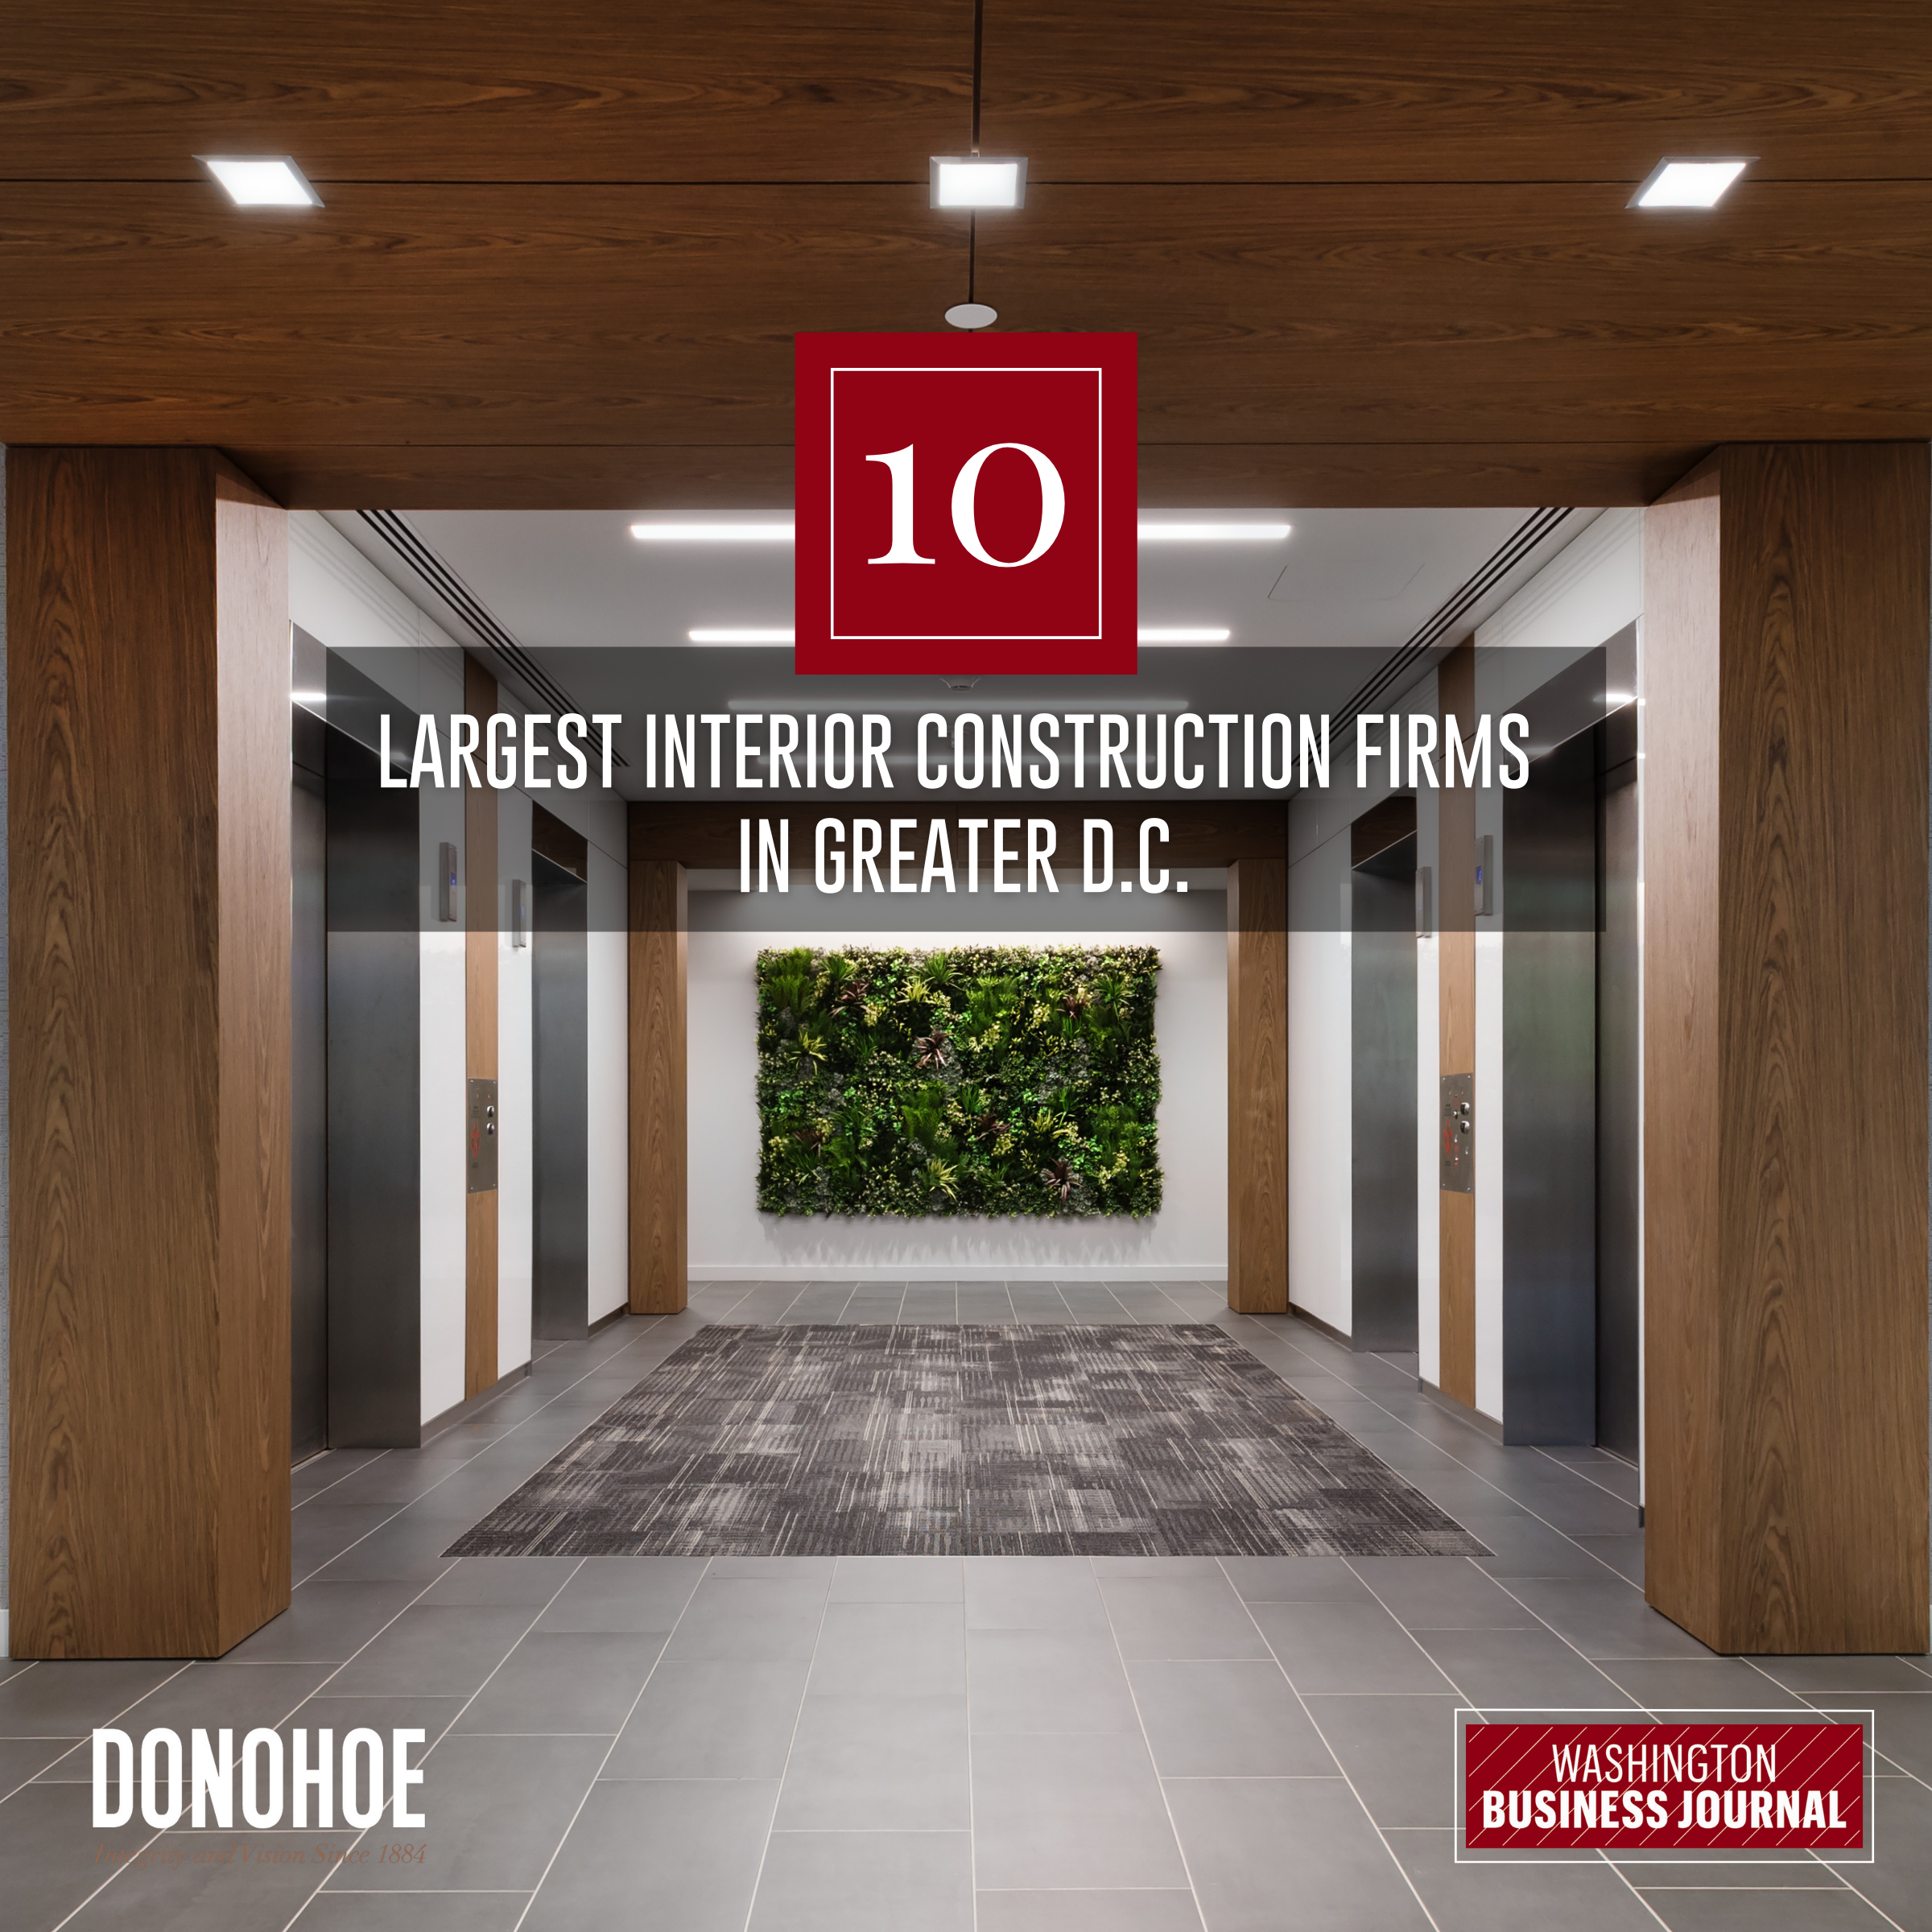 Donohoe Construction Named One Of The Largest Interior Construction Firms in Greater D.C. Thumbnail